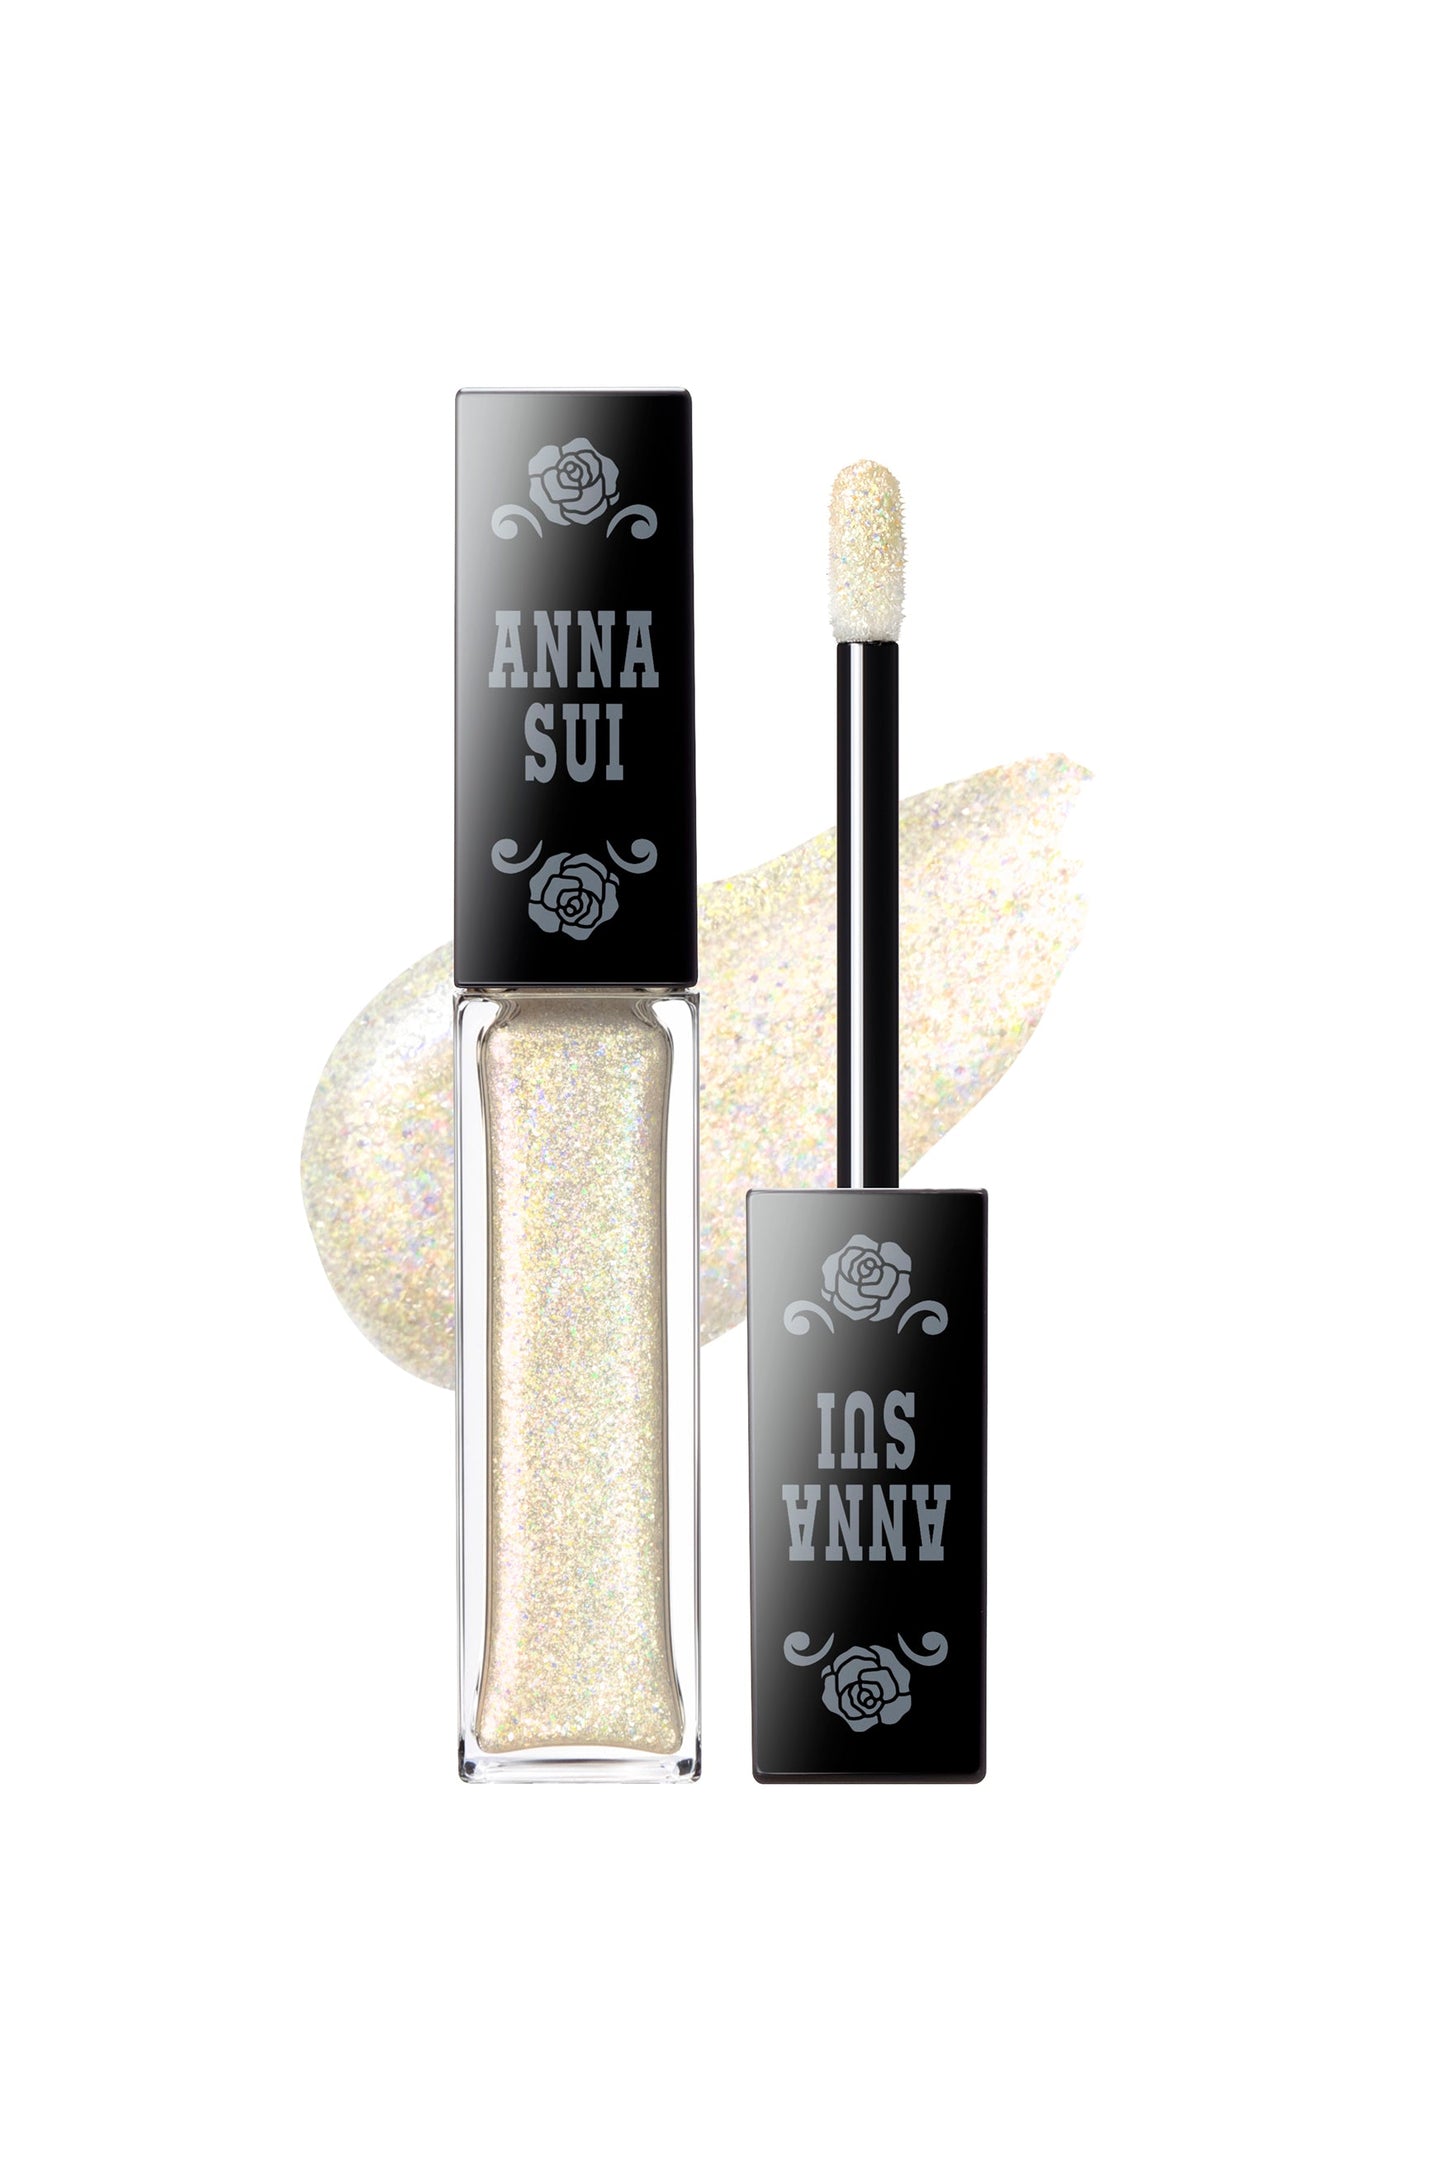 PEARLESCENT WHITE, Eye Glitter in a transparent bottle with Anna Sui label on the black top